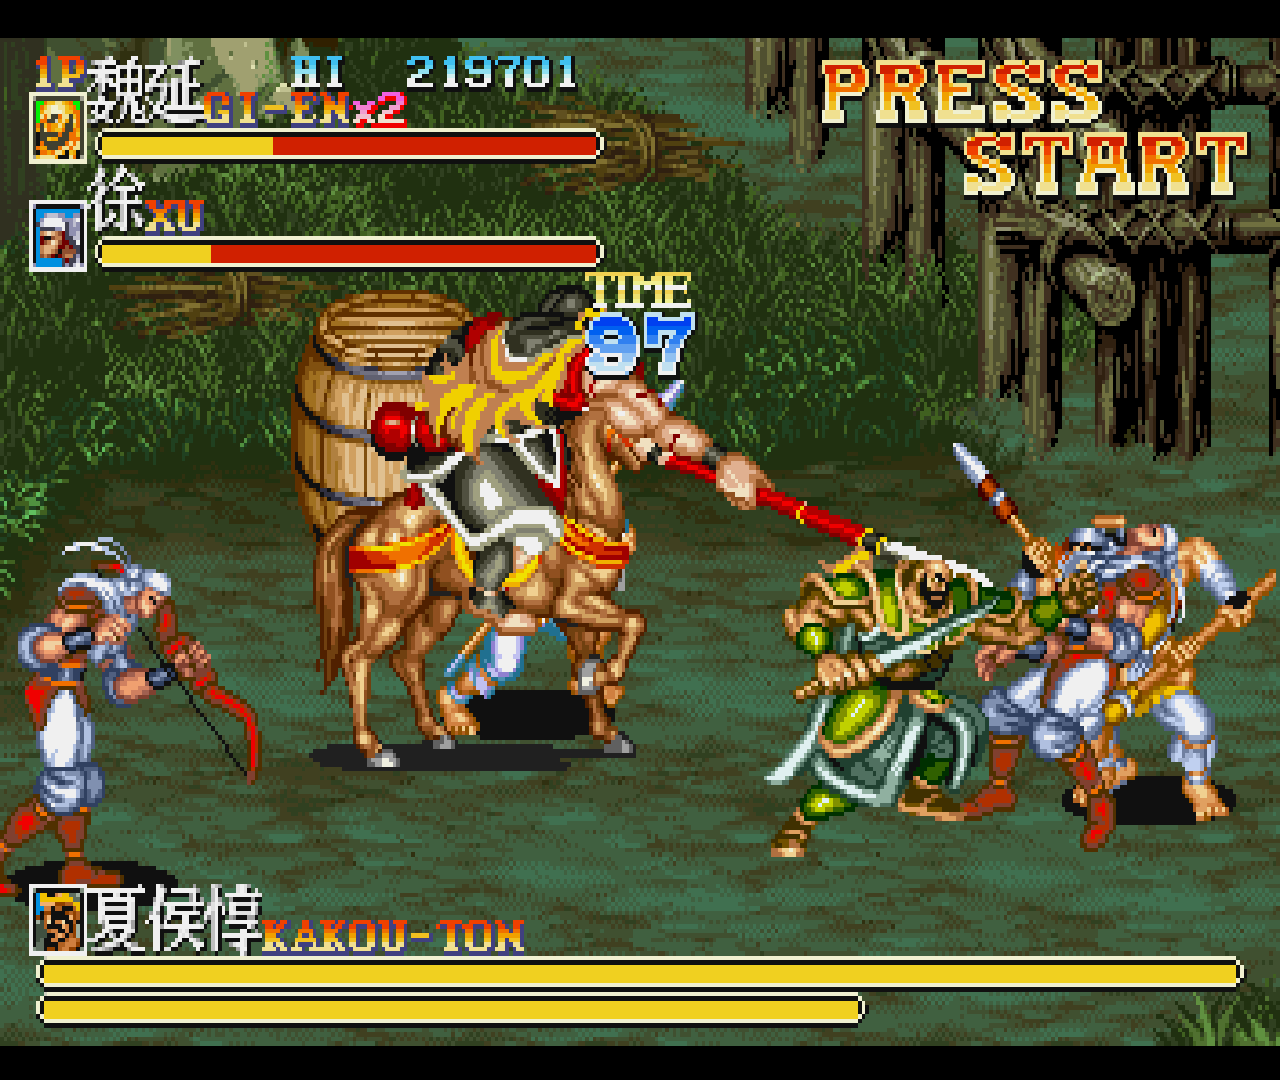 Figure 3 - Boss fight on the second stage, and the health bars keep getting longer